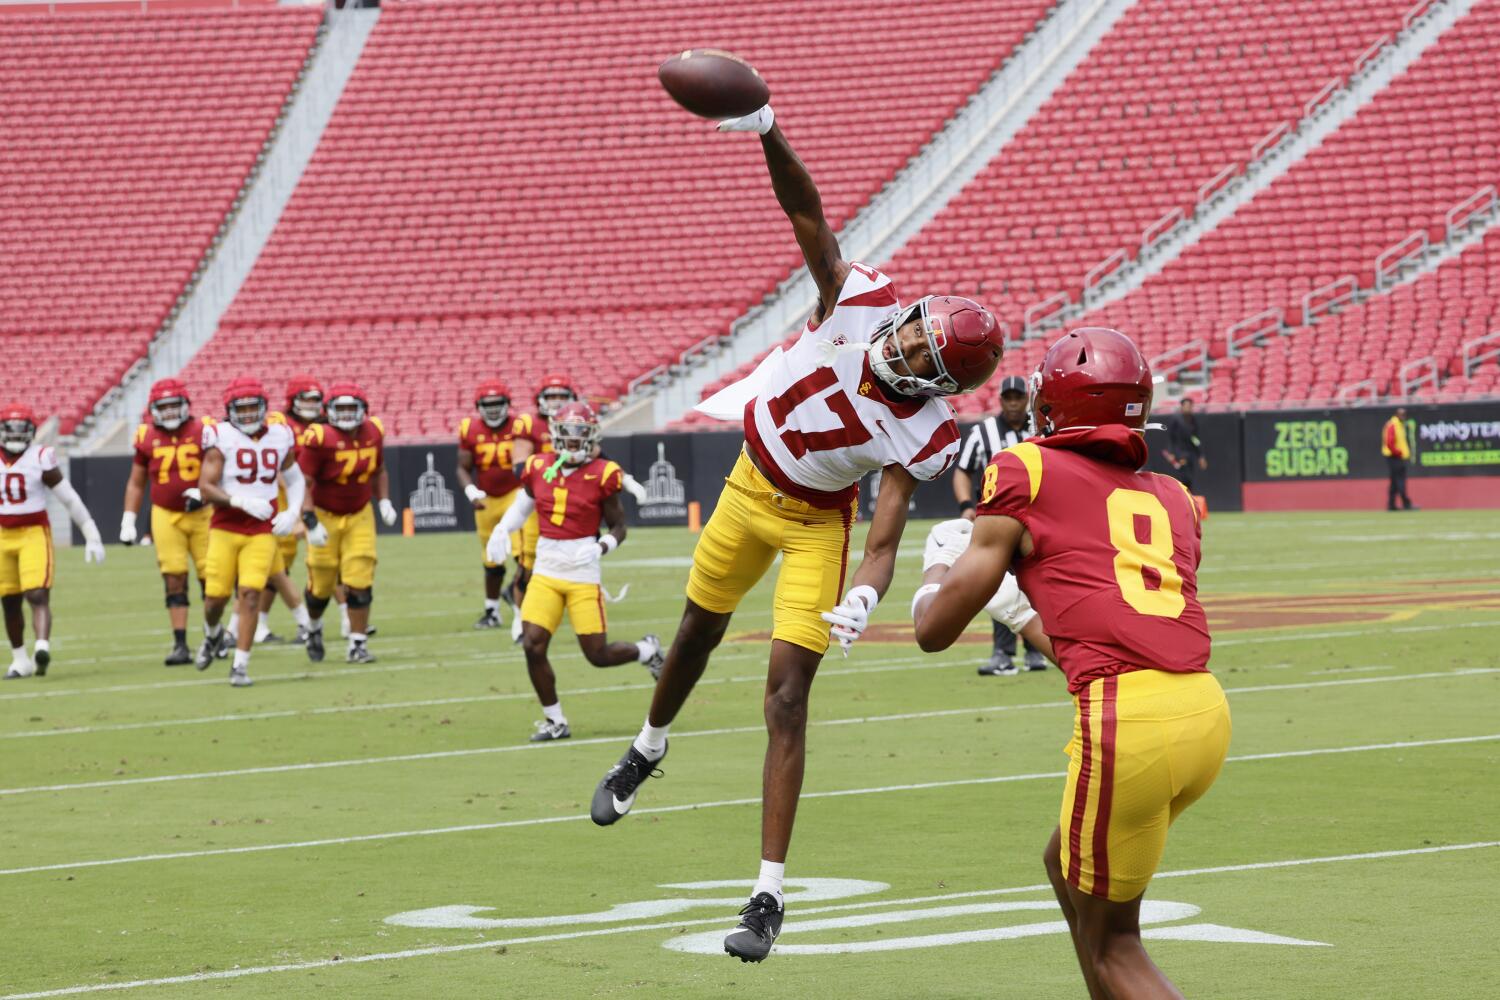 'Hungry for more': Takeaways from USC football's spring camp